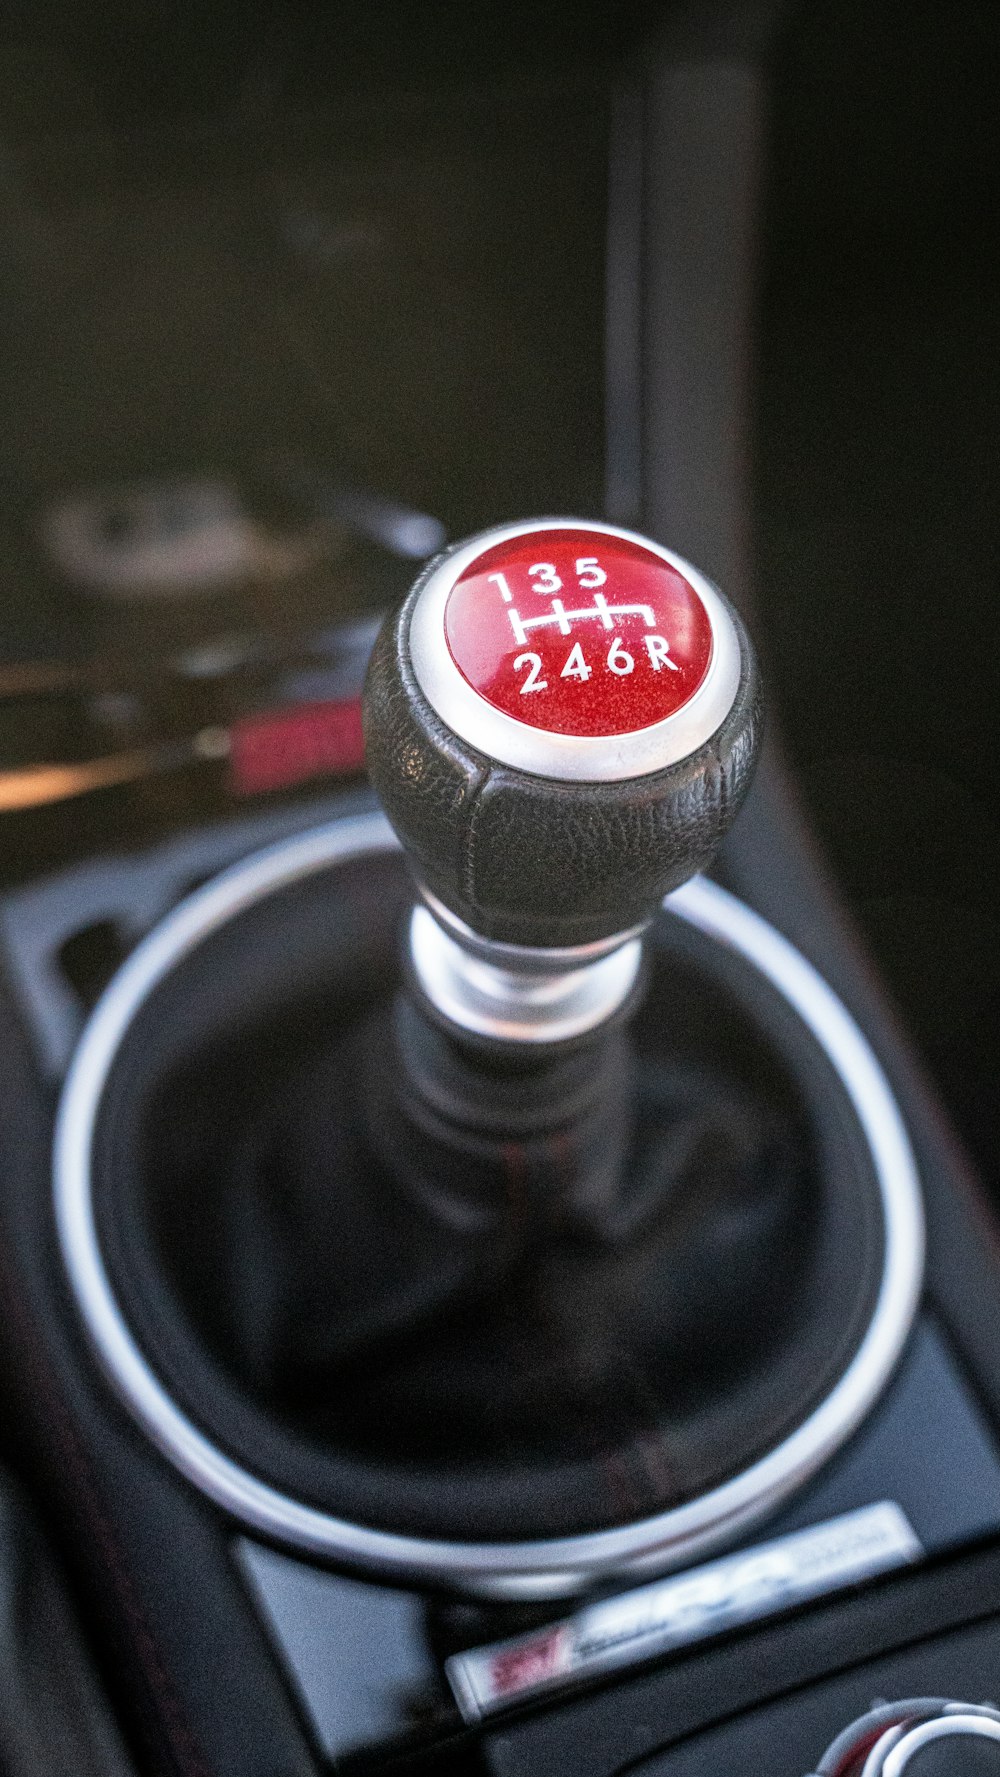 a close up of a button on a steering wheel